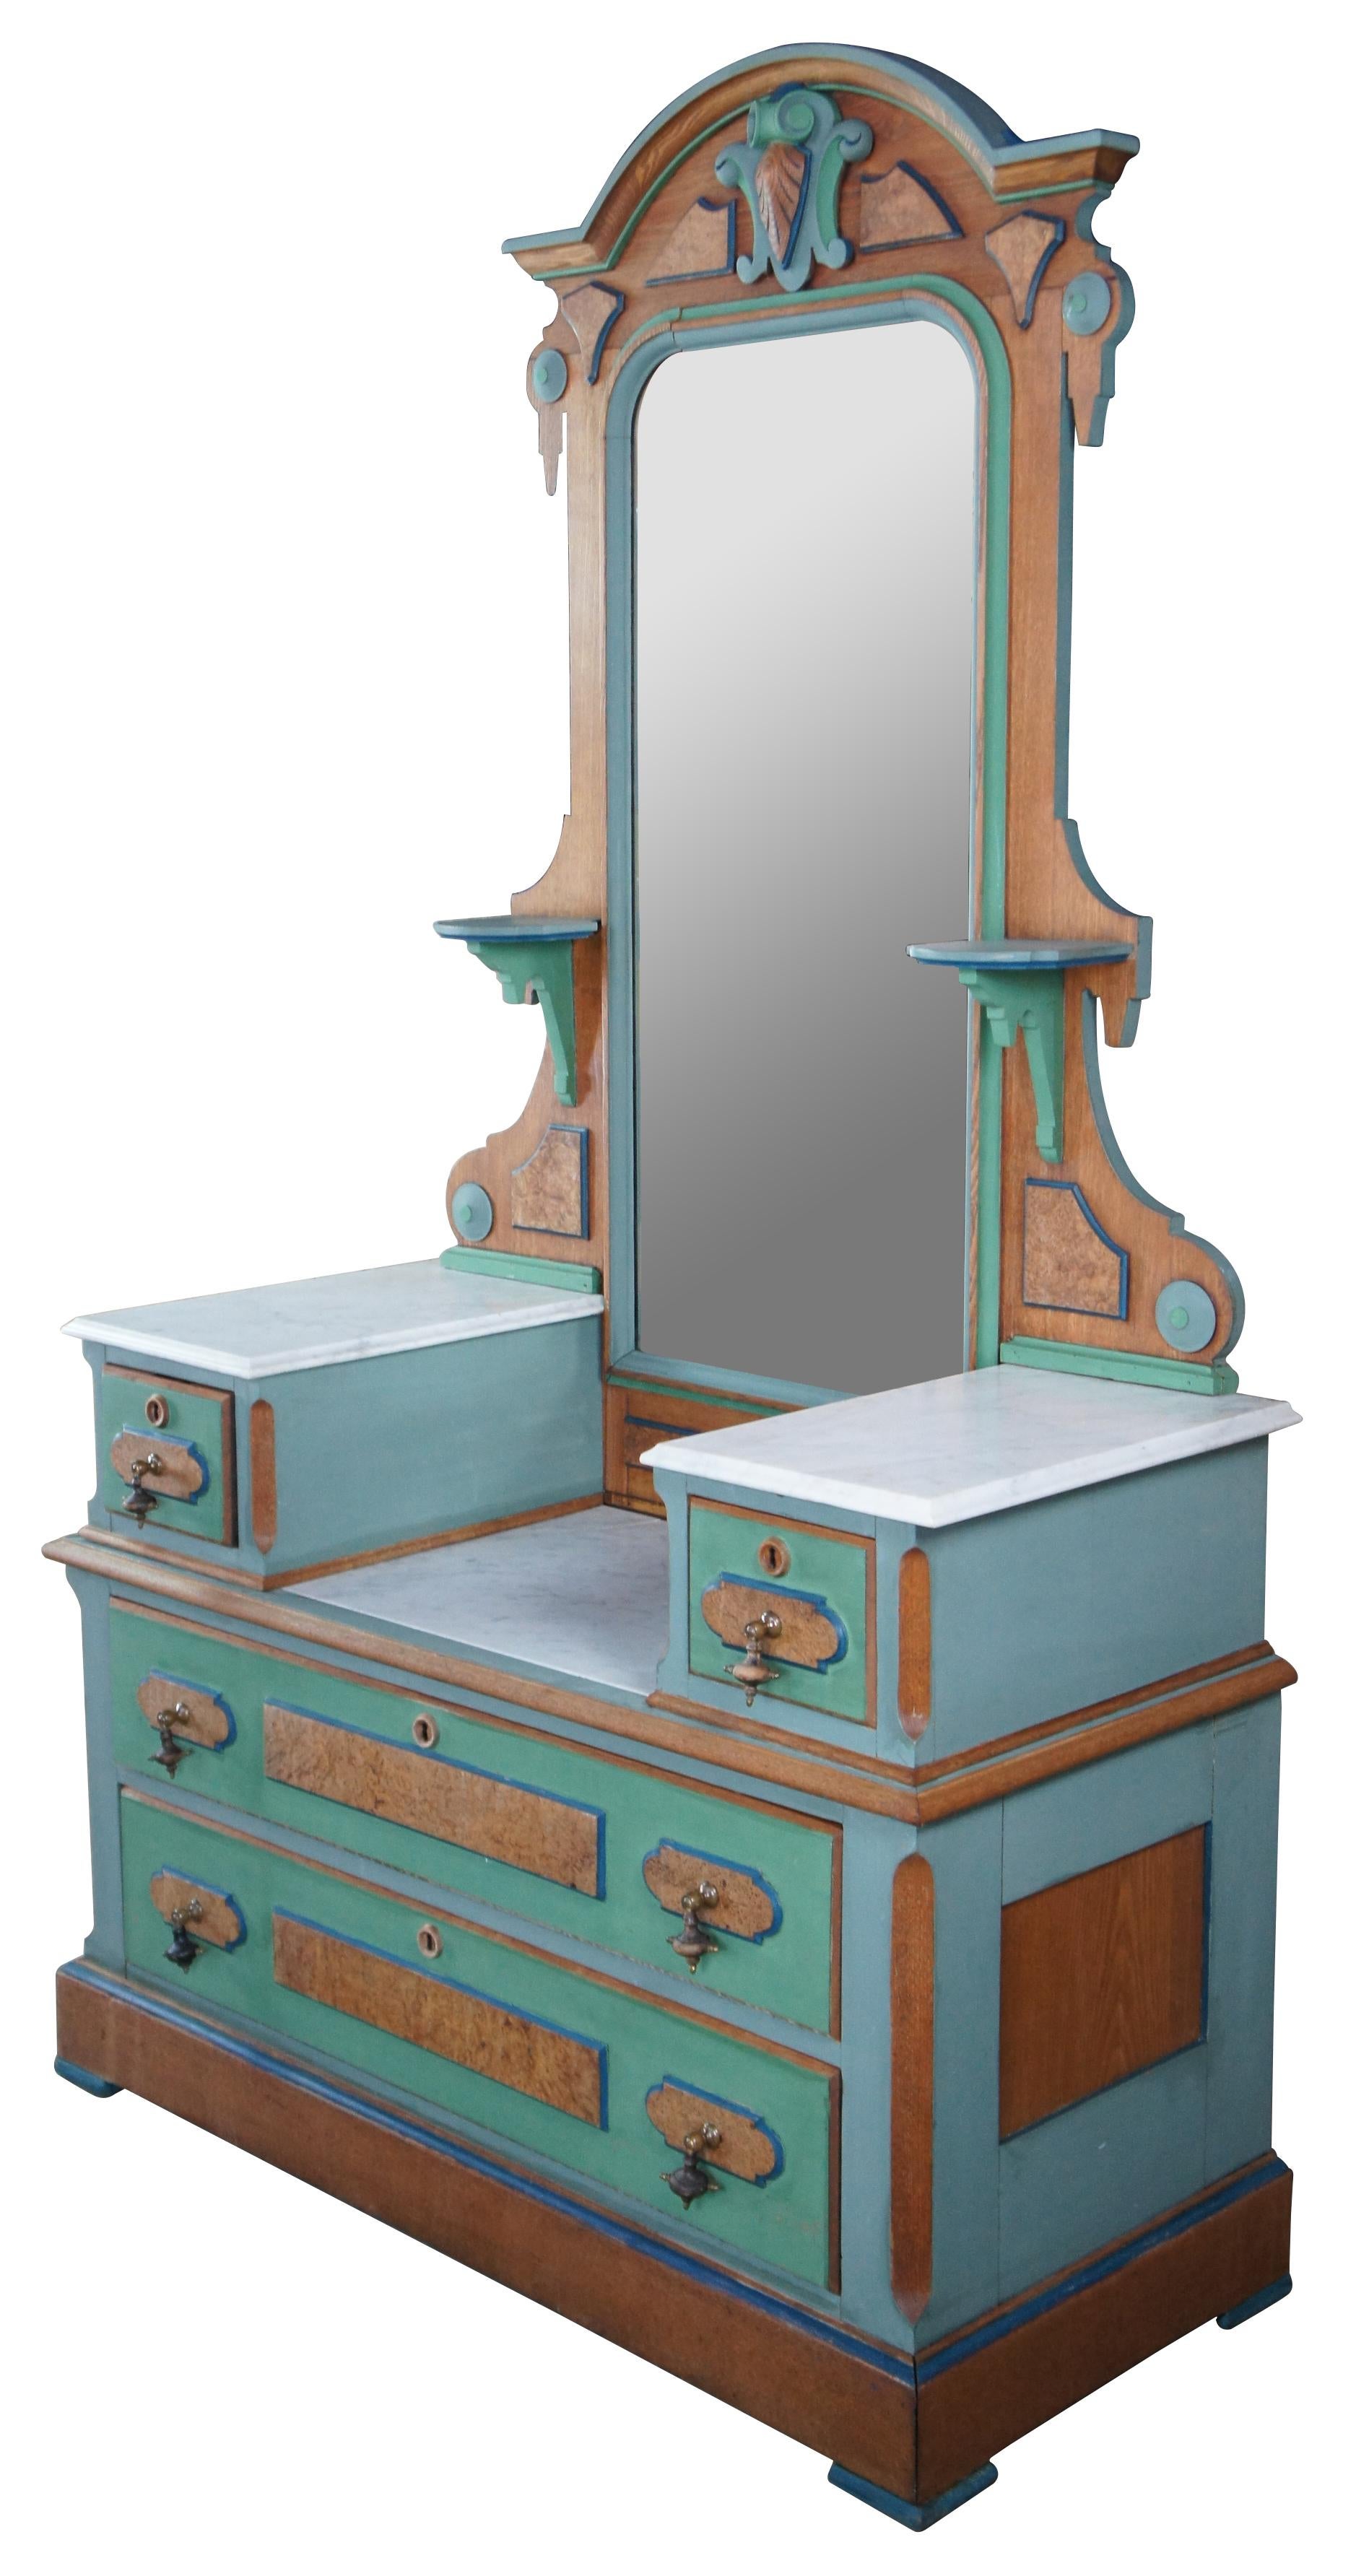 Antique Victorian Eastlake gentlemans dropwell mirrored vanity dresser or shaving / wash stand. Made of oak featuring birdseye maple panels with painted accents, marble tops, and multiple drawers with brutalist tear drop pulls.

Measures: 46.5